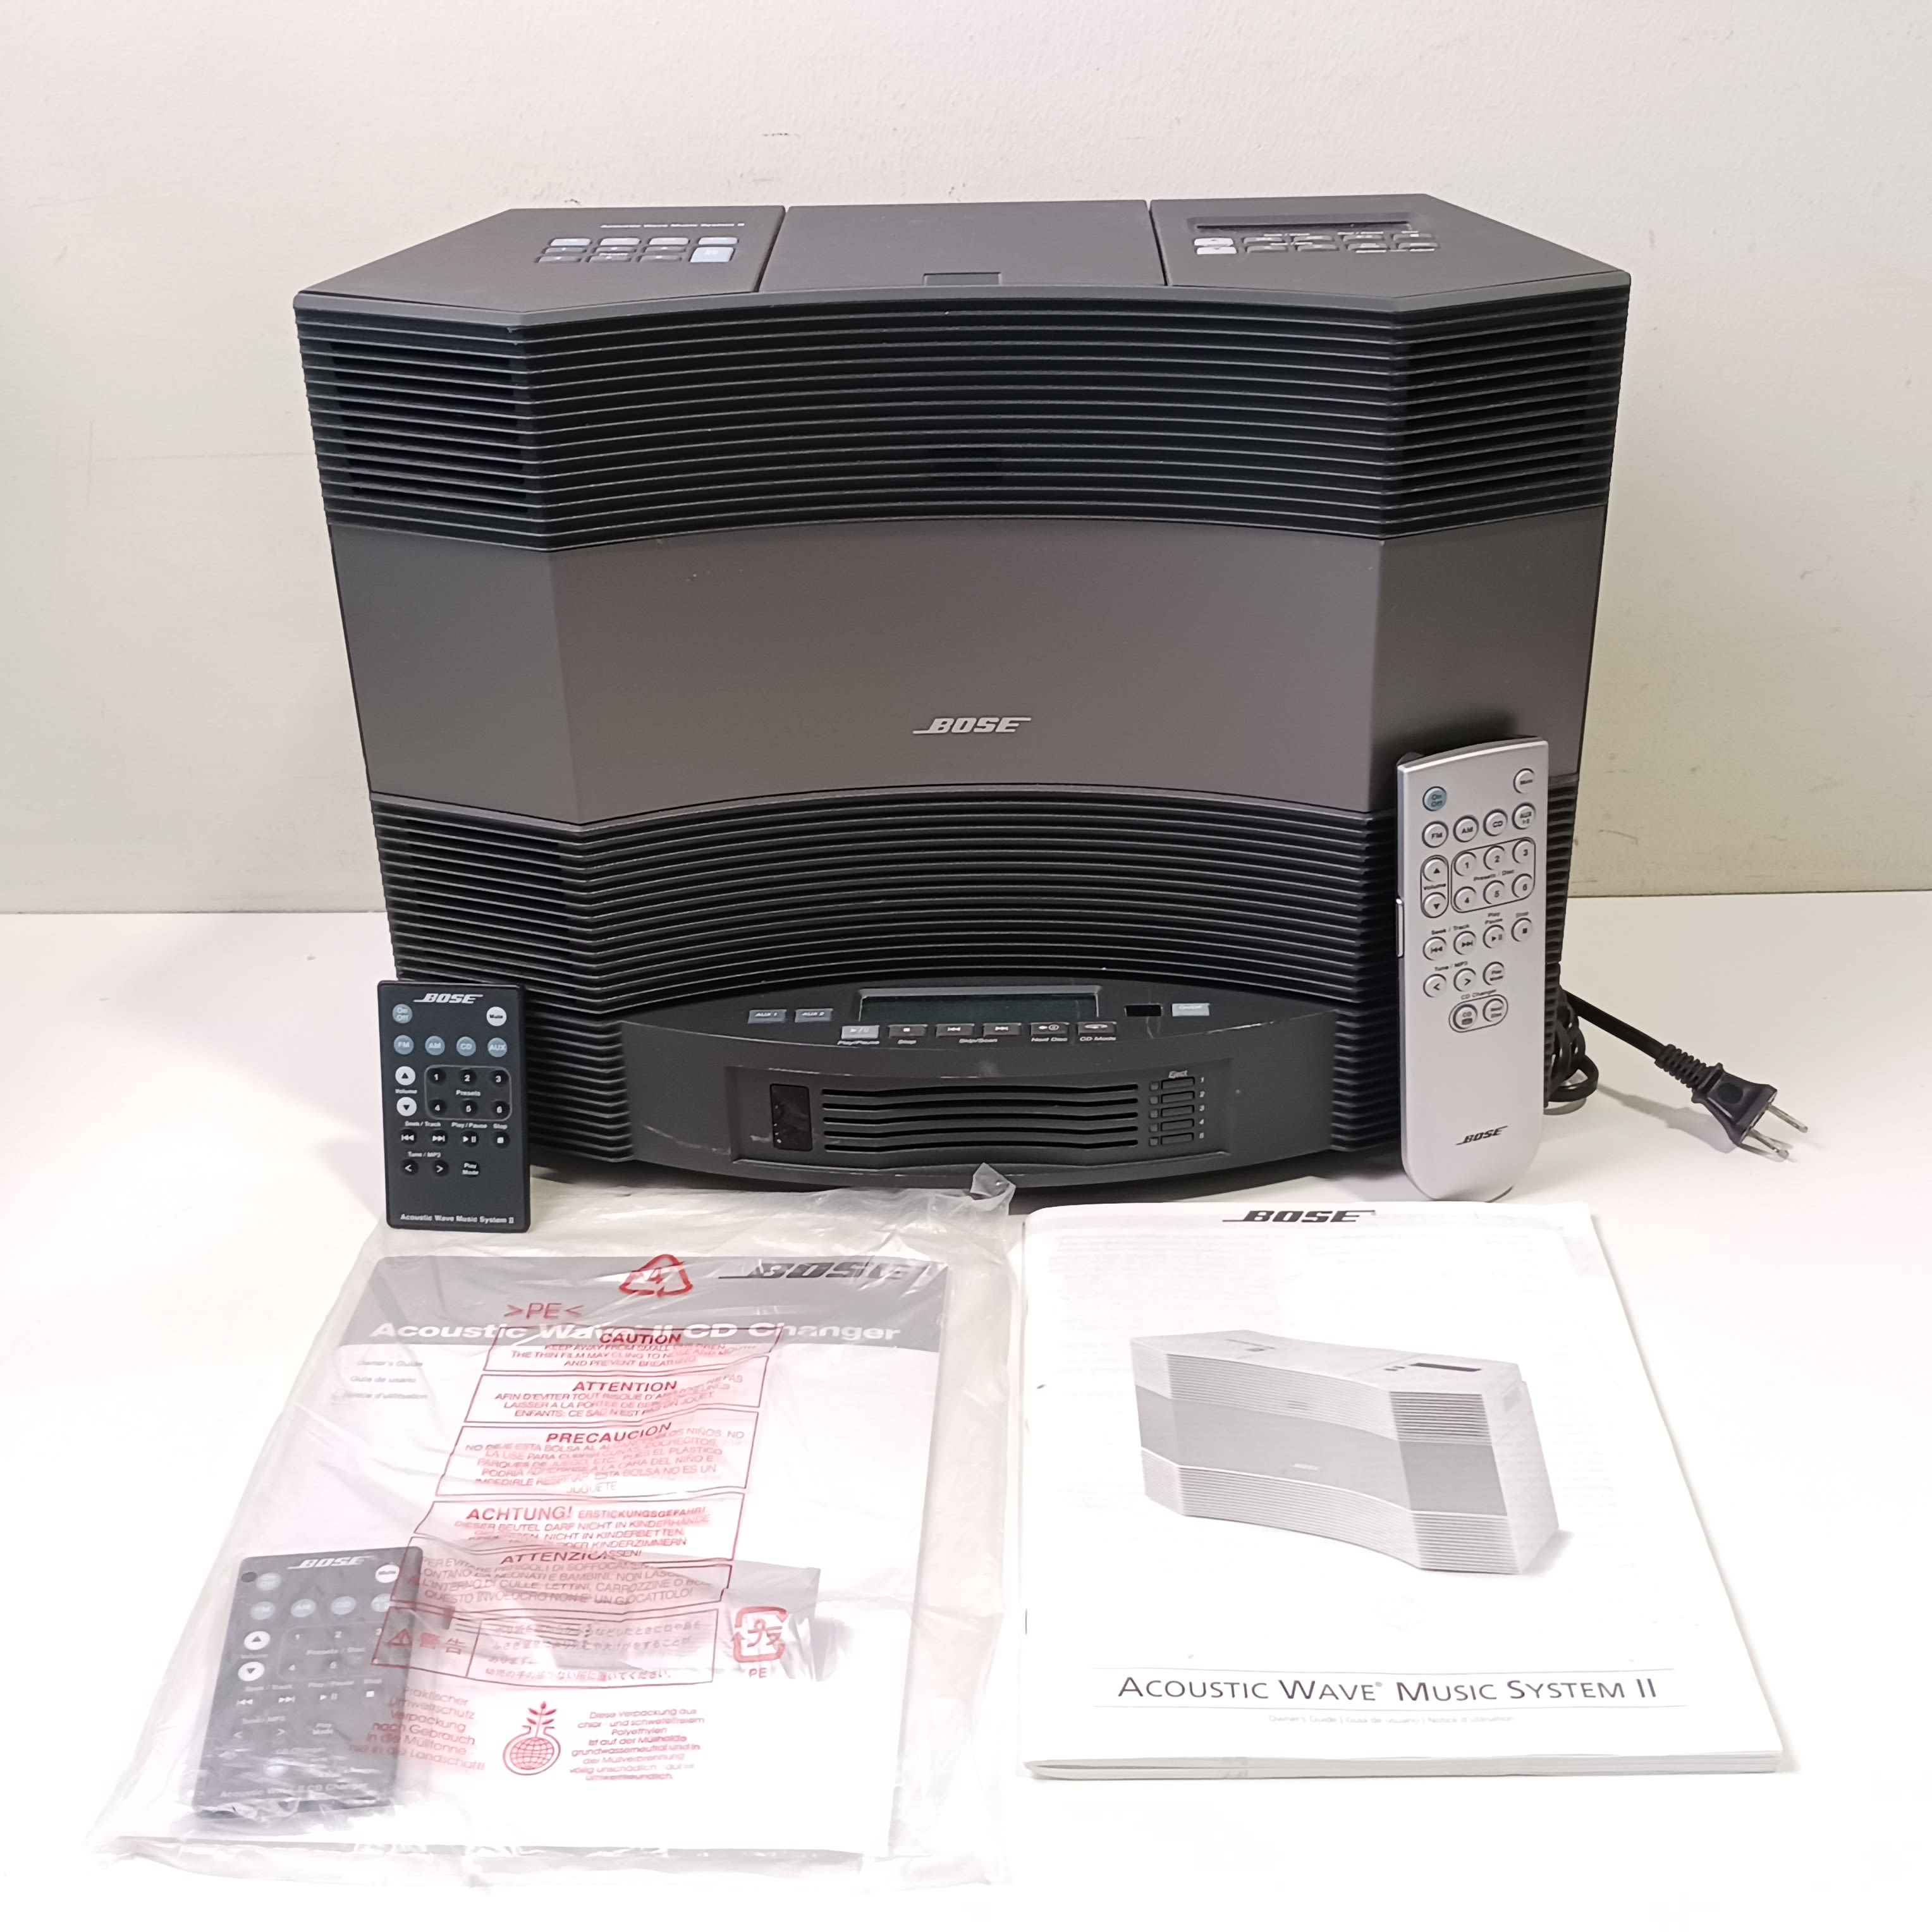 Bose Acoustic Wave music system II - スピーカー